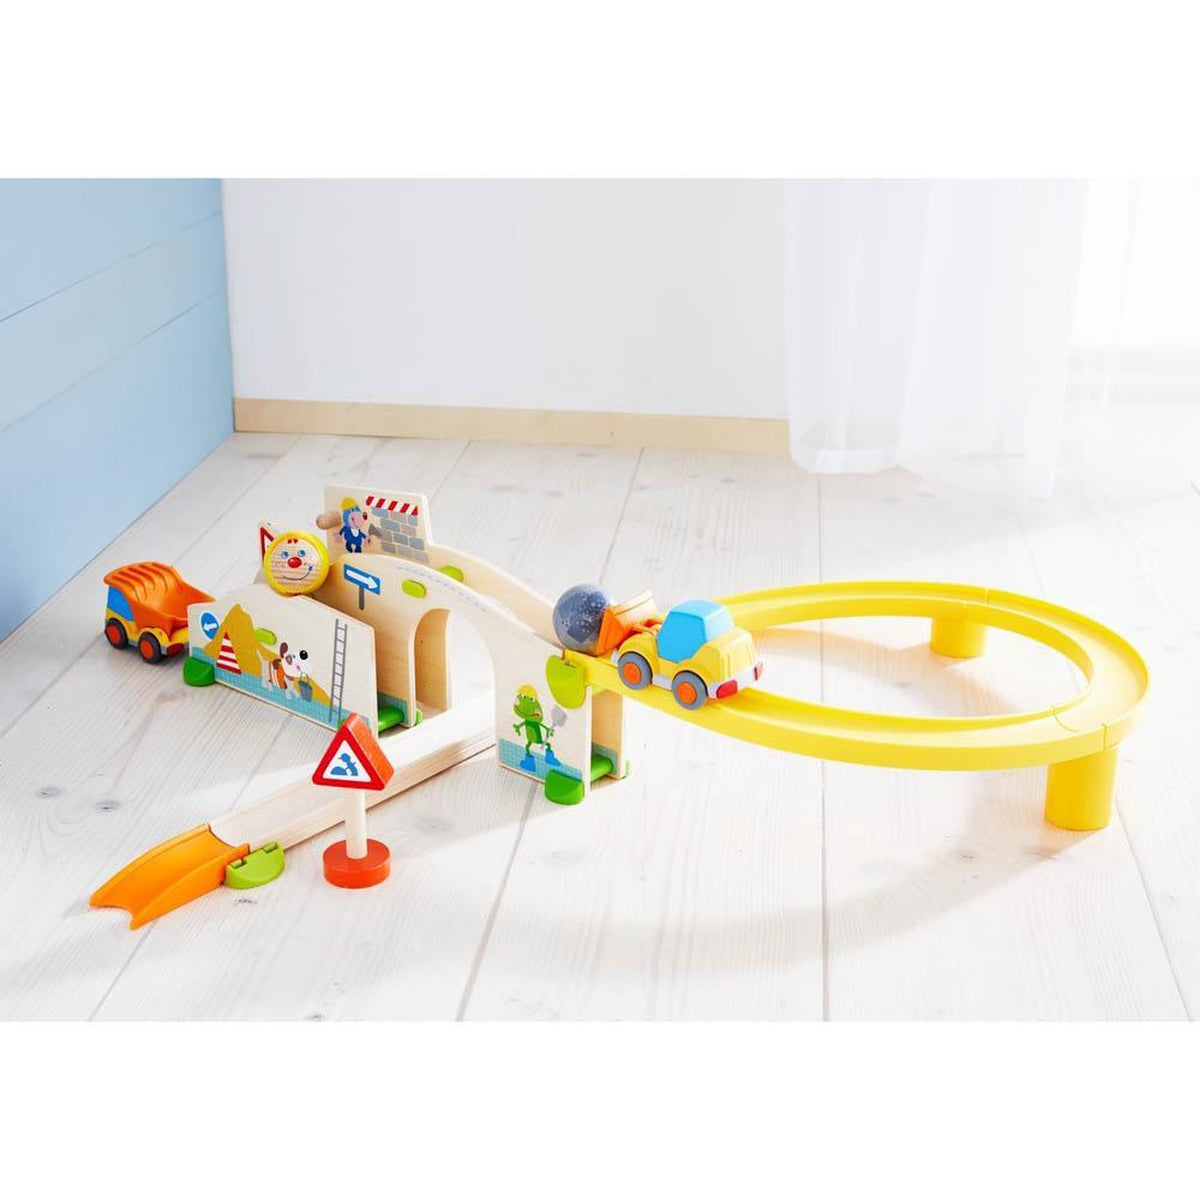 Marble Runs and Ball Tracks for 3 Year Olds